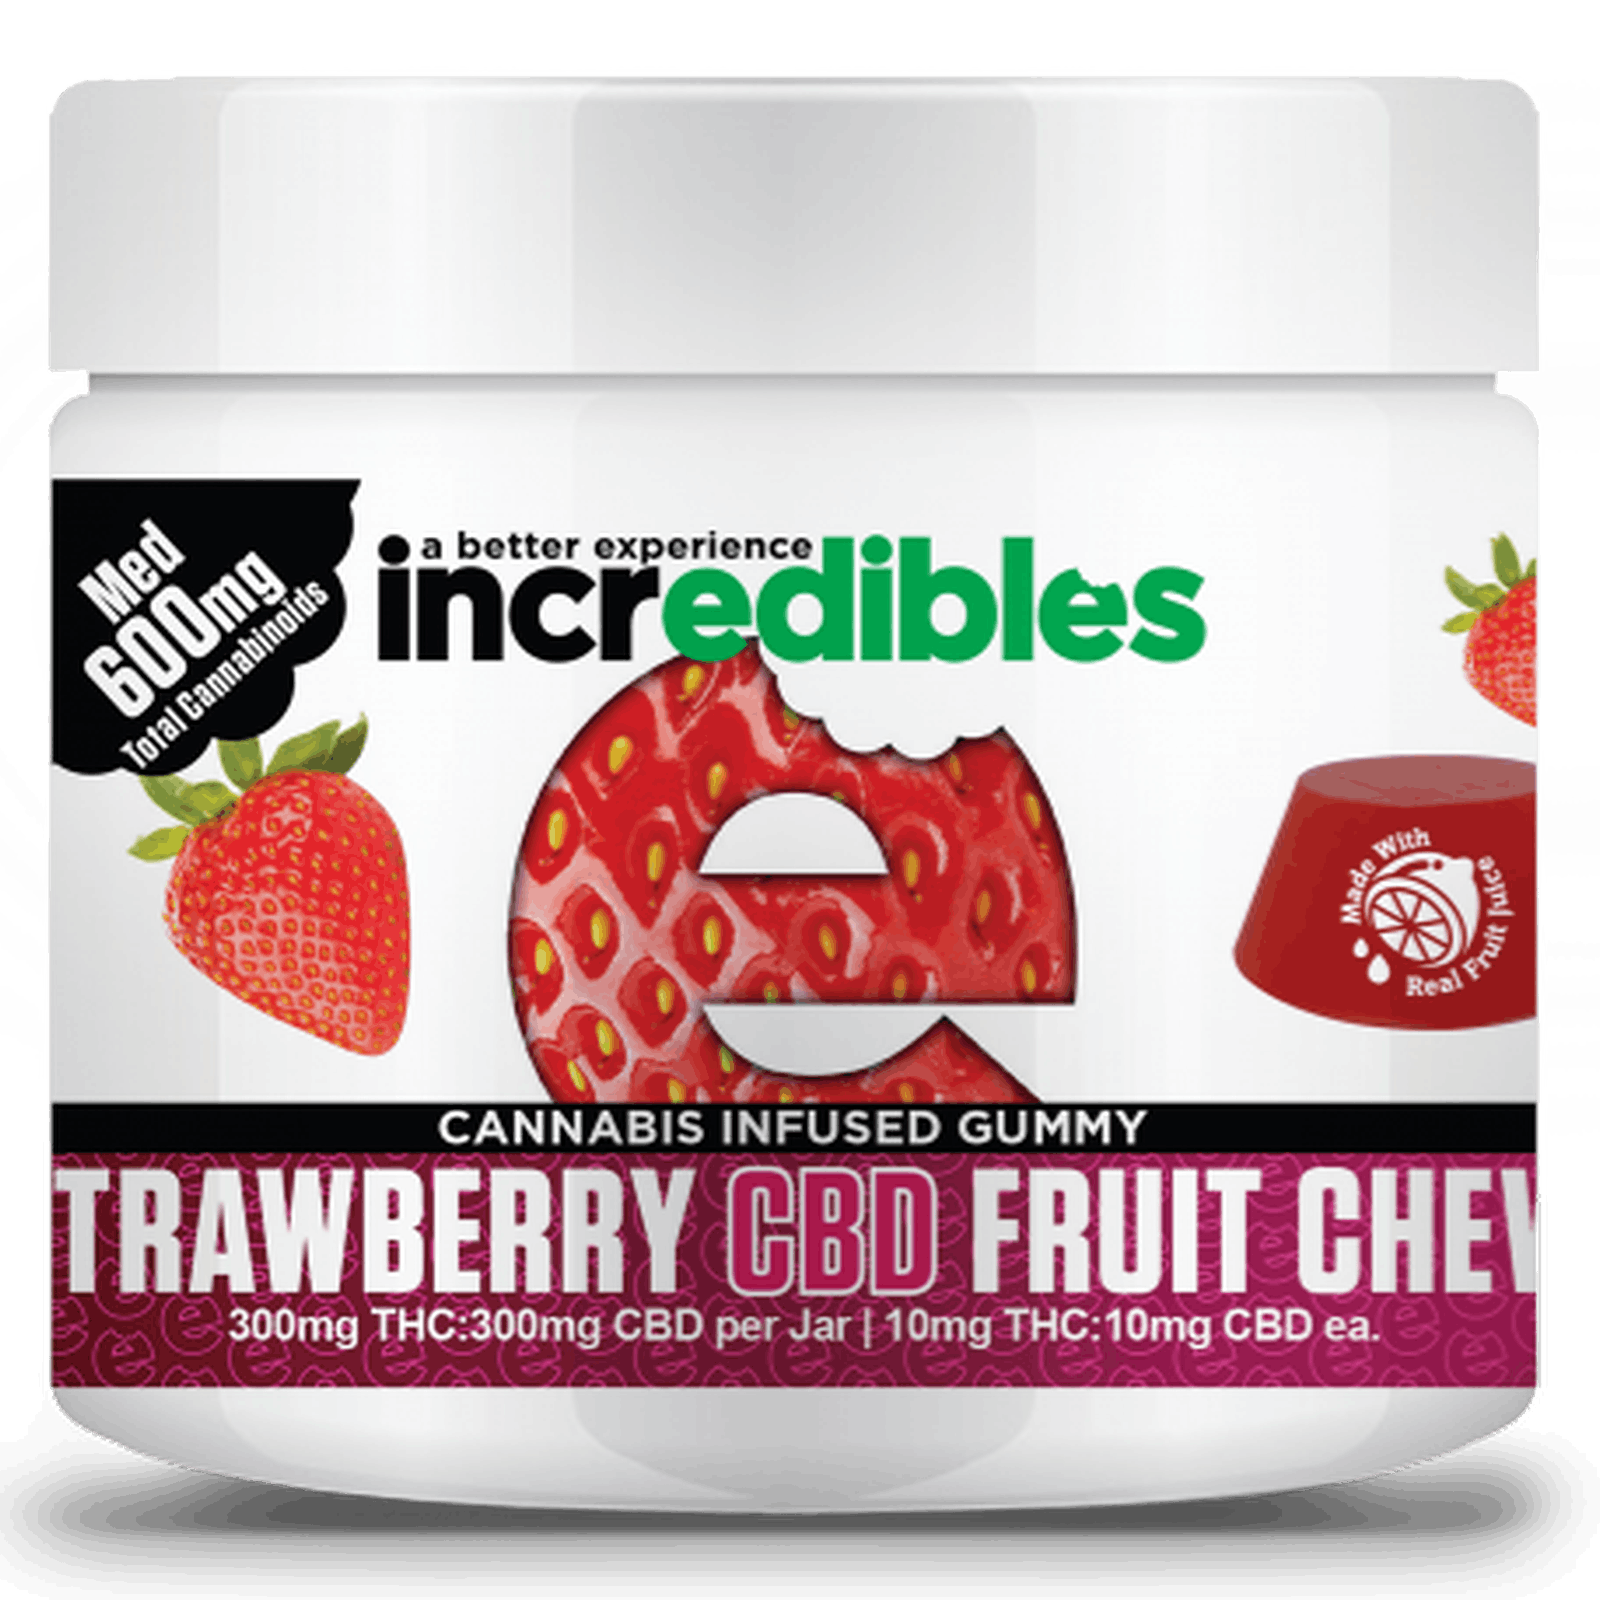 Incredibles strawberry cbd review